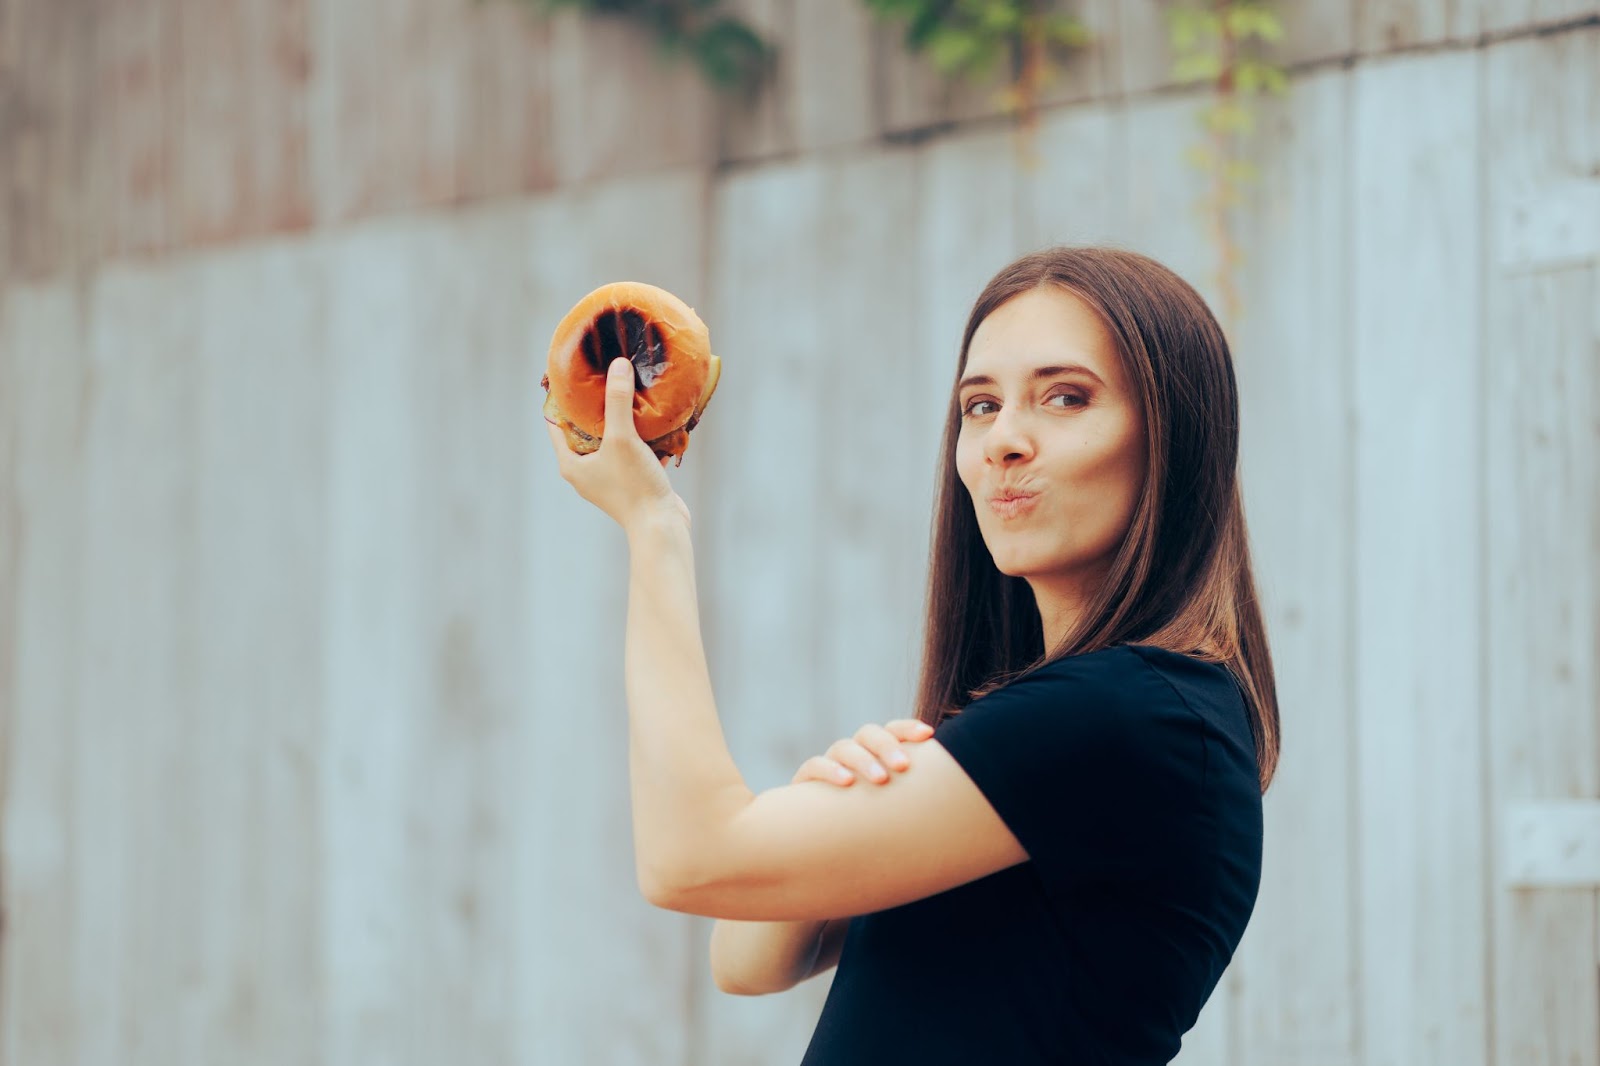 Young woman holding a hamburger and feeling strong and powerful